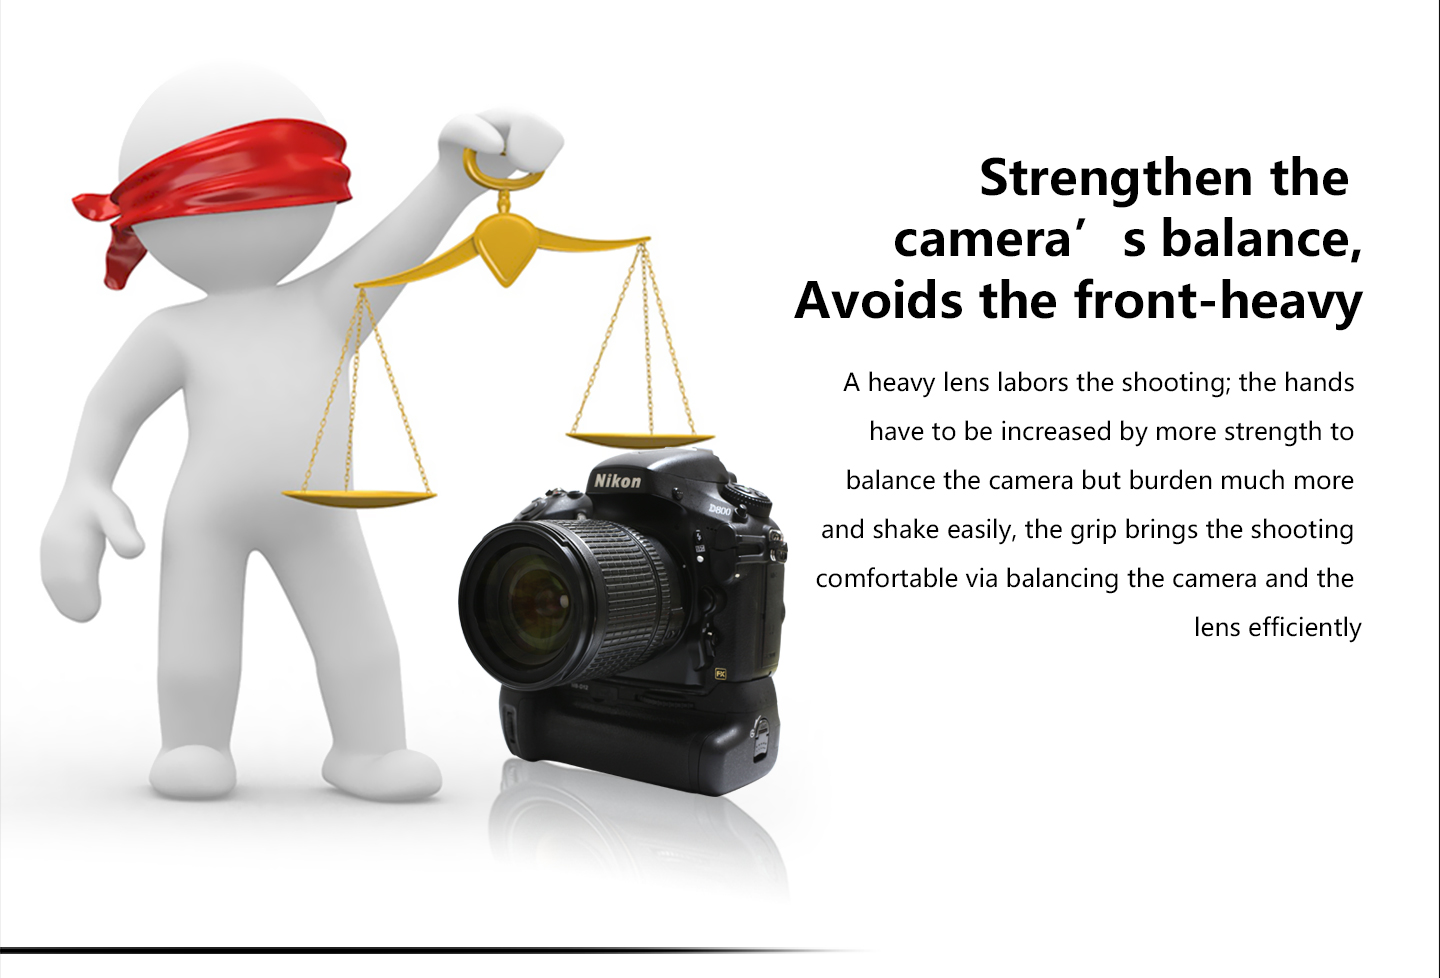 Strengthen the camera's balance, Avoids the front-heavy